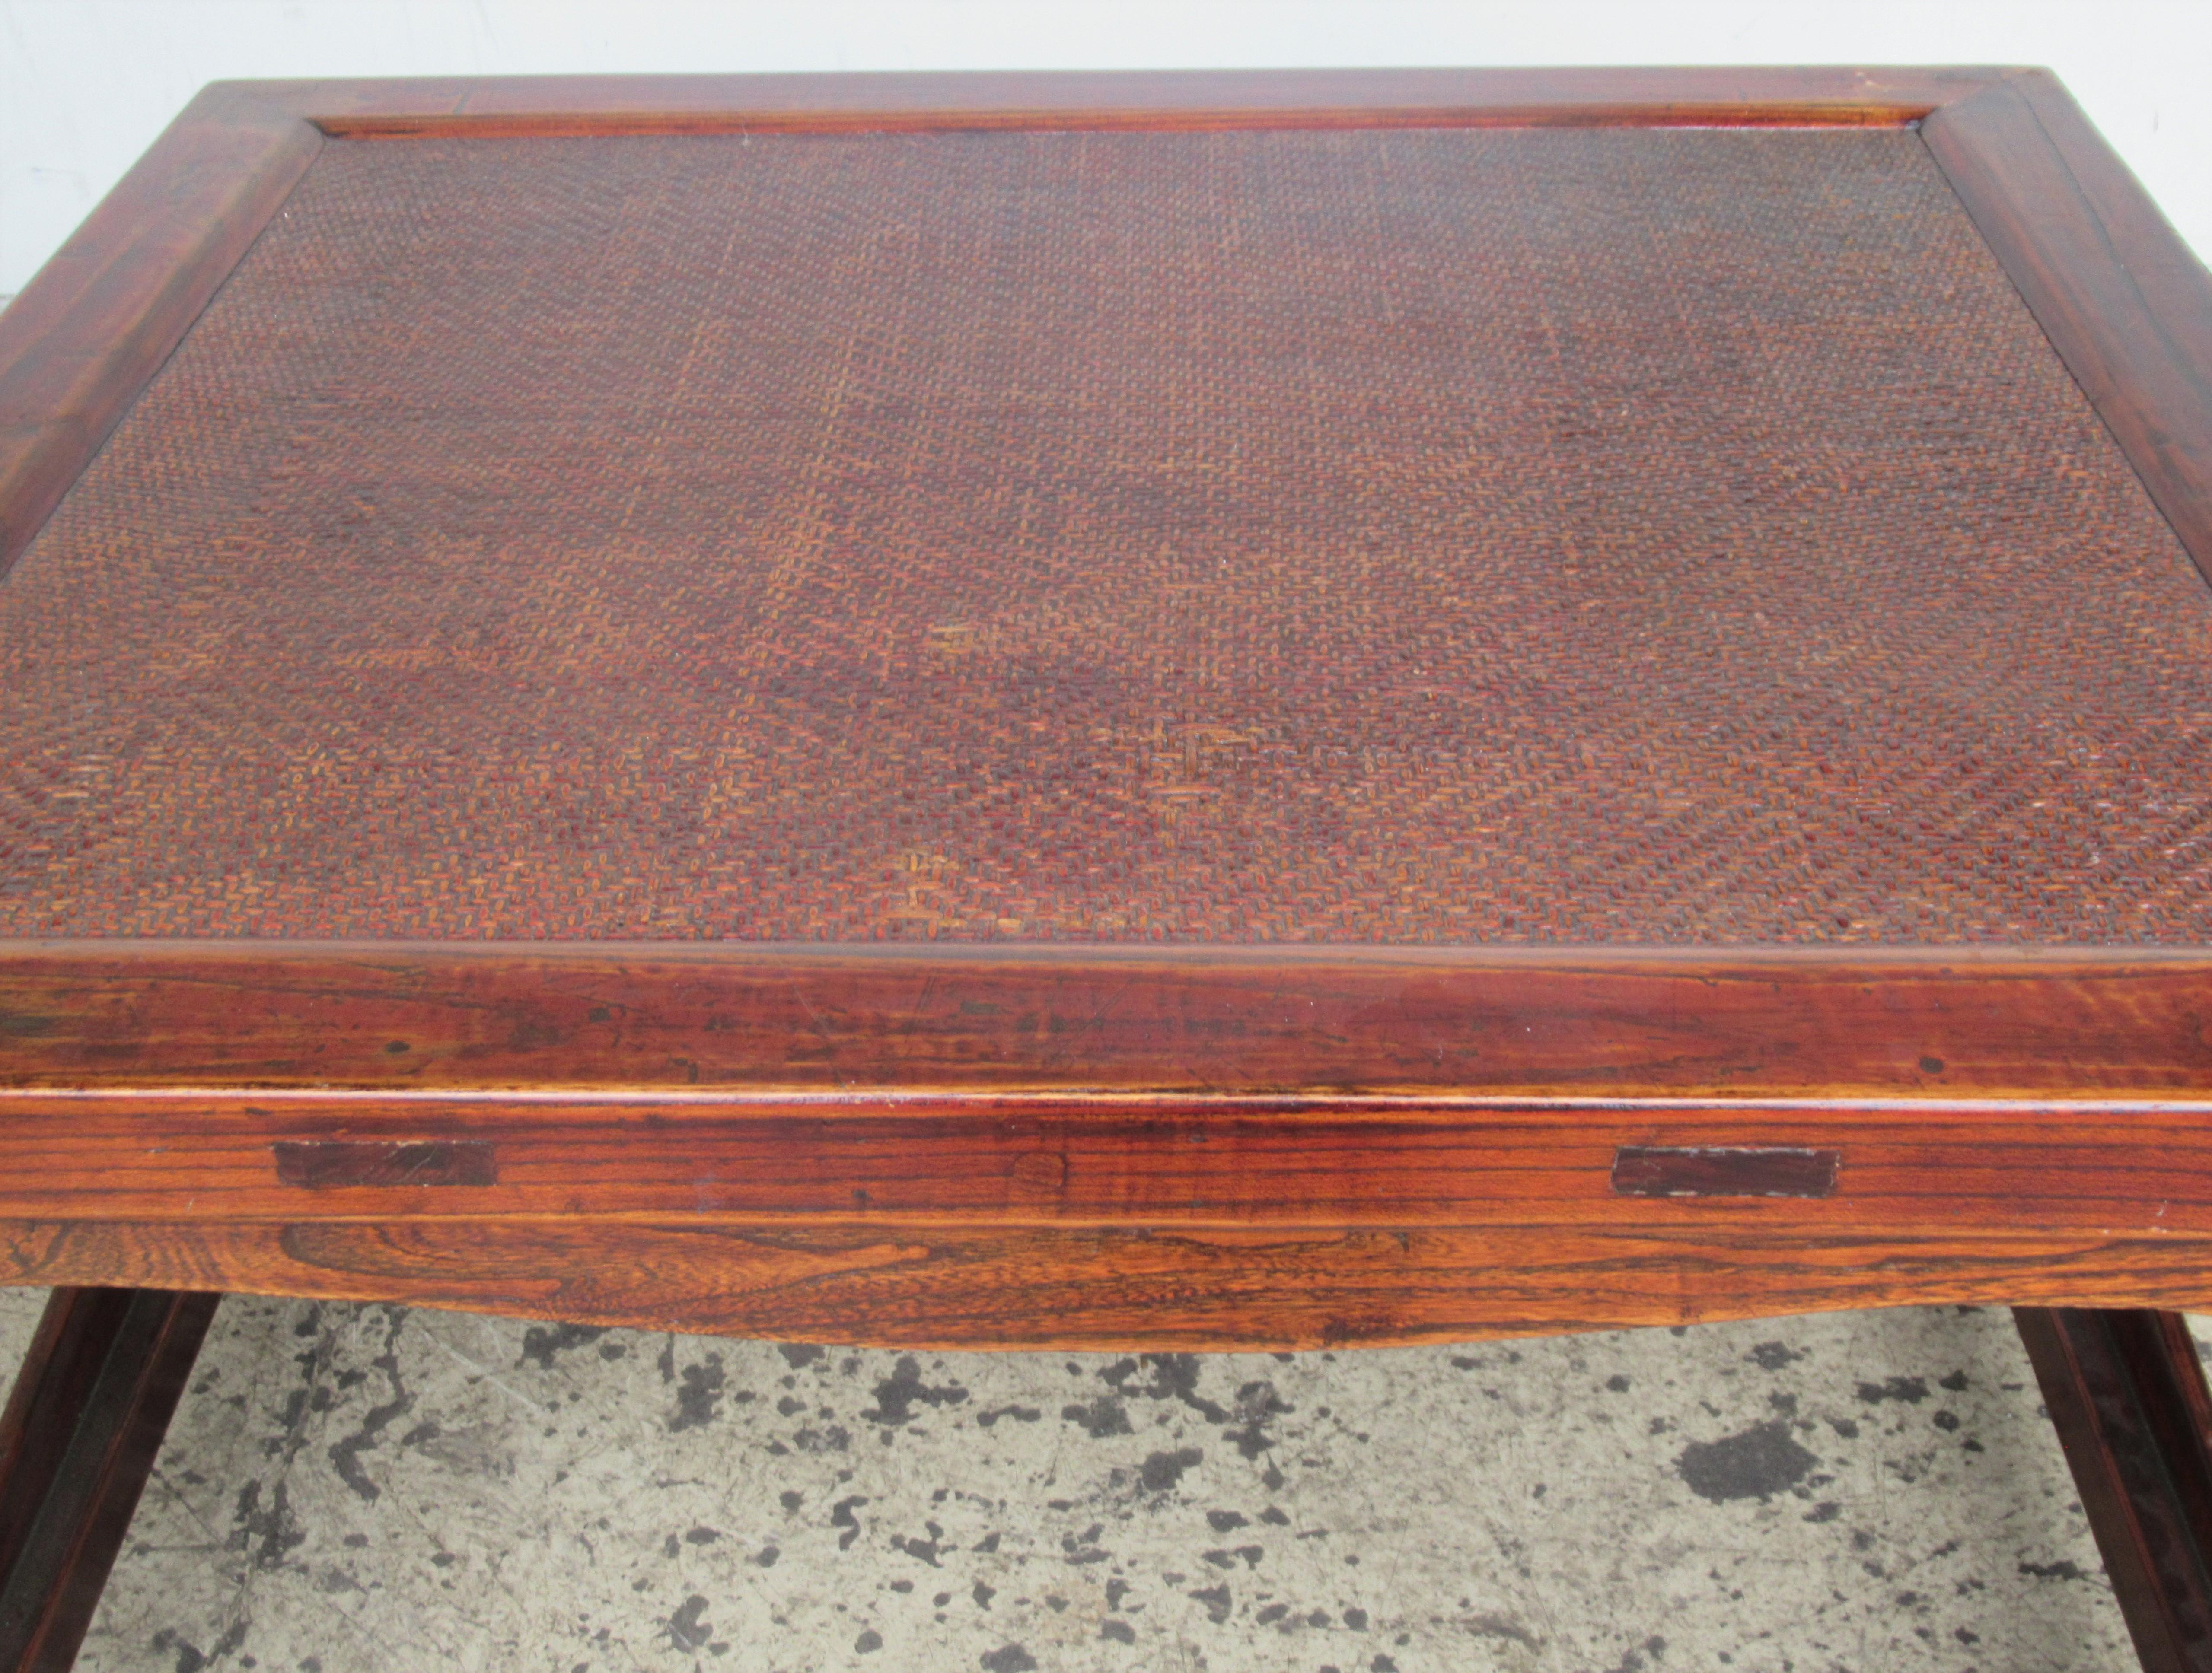 Caning Antique Chinese Elm Coffee Table For Sale